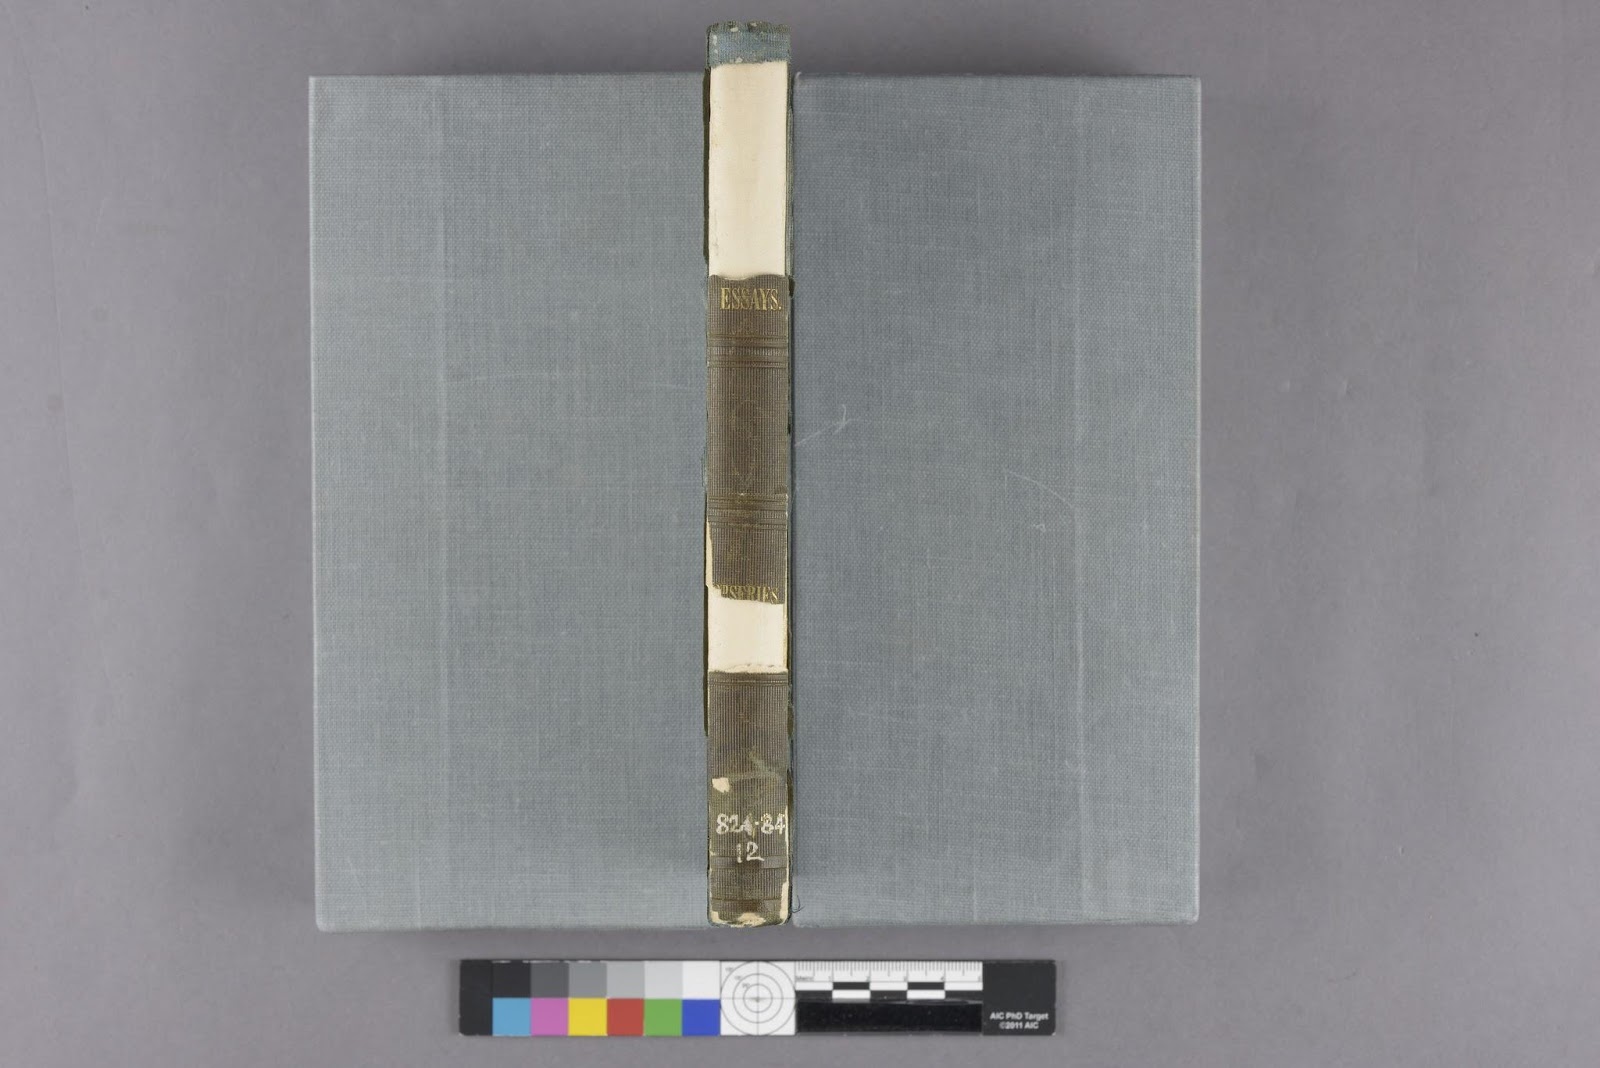 Spine of R. W. Emerson's Essays (1841) before undergoing conservation treatment